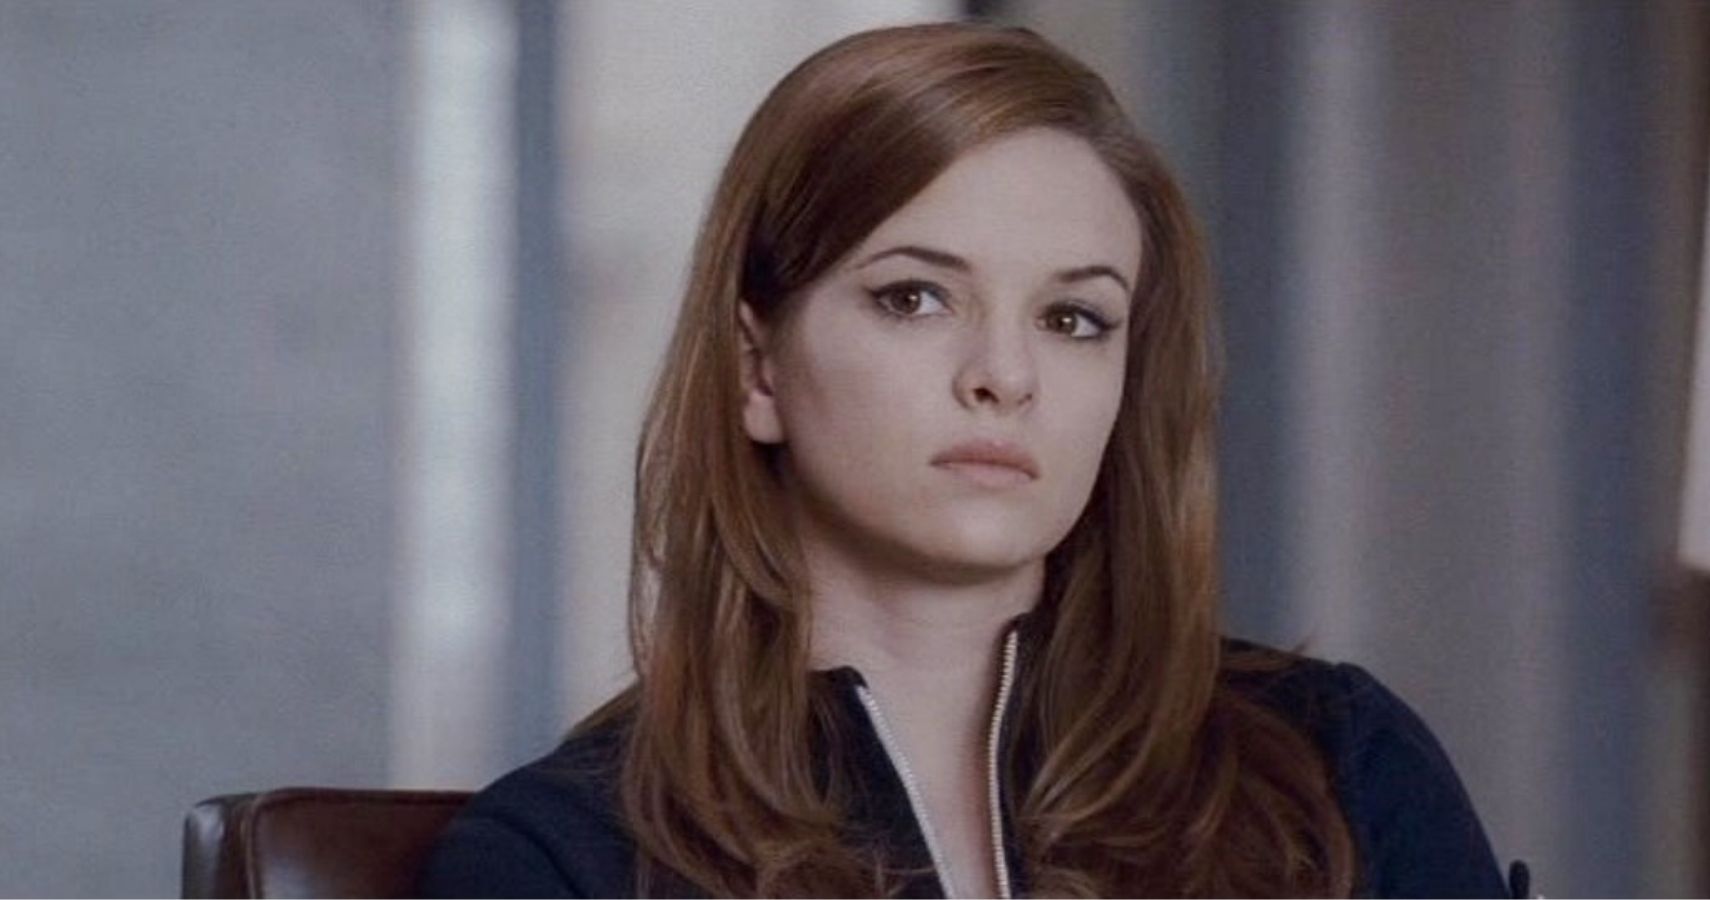 Danielle Panabaker in The Ward